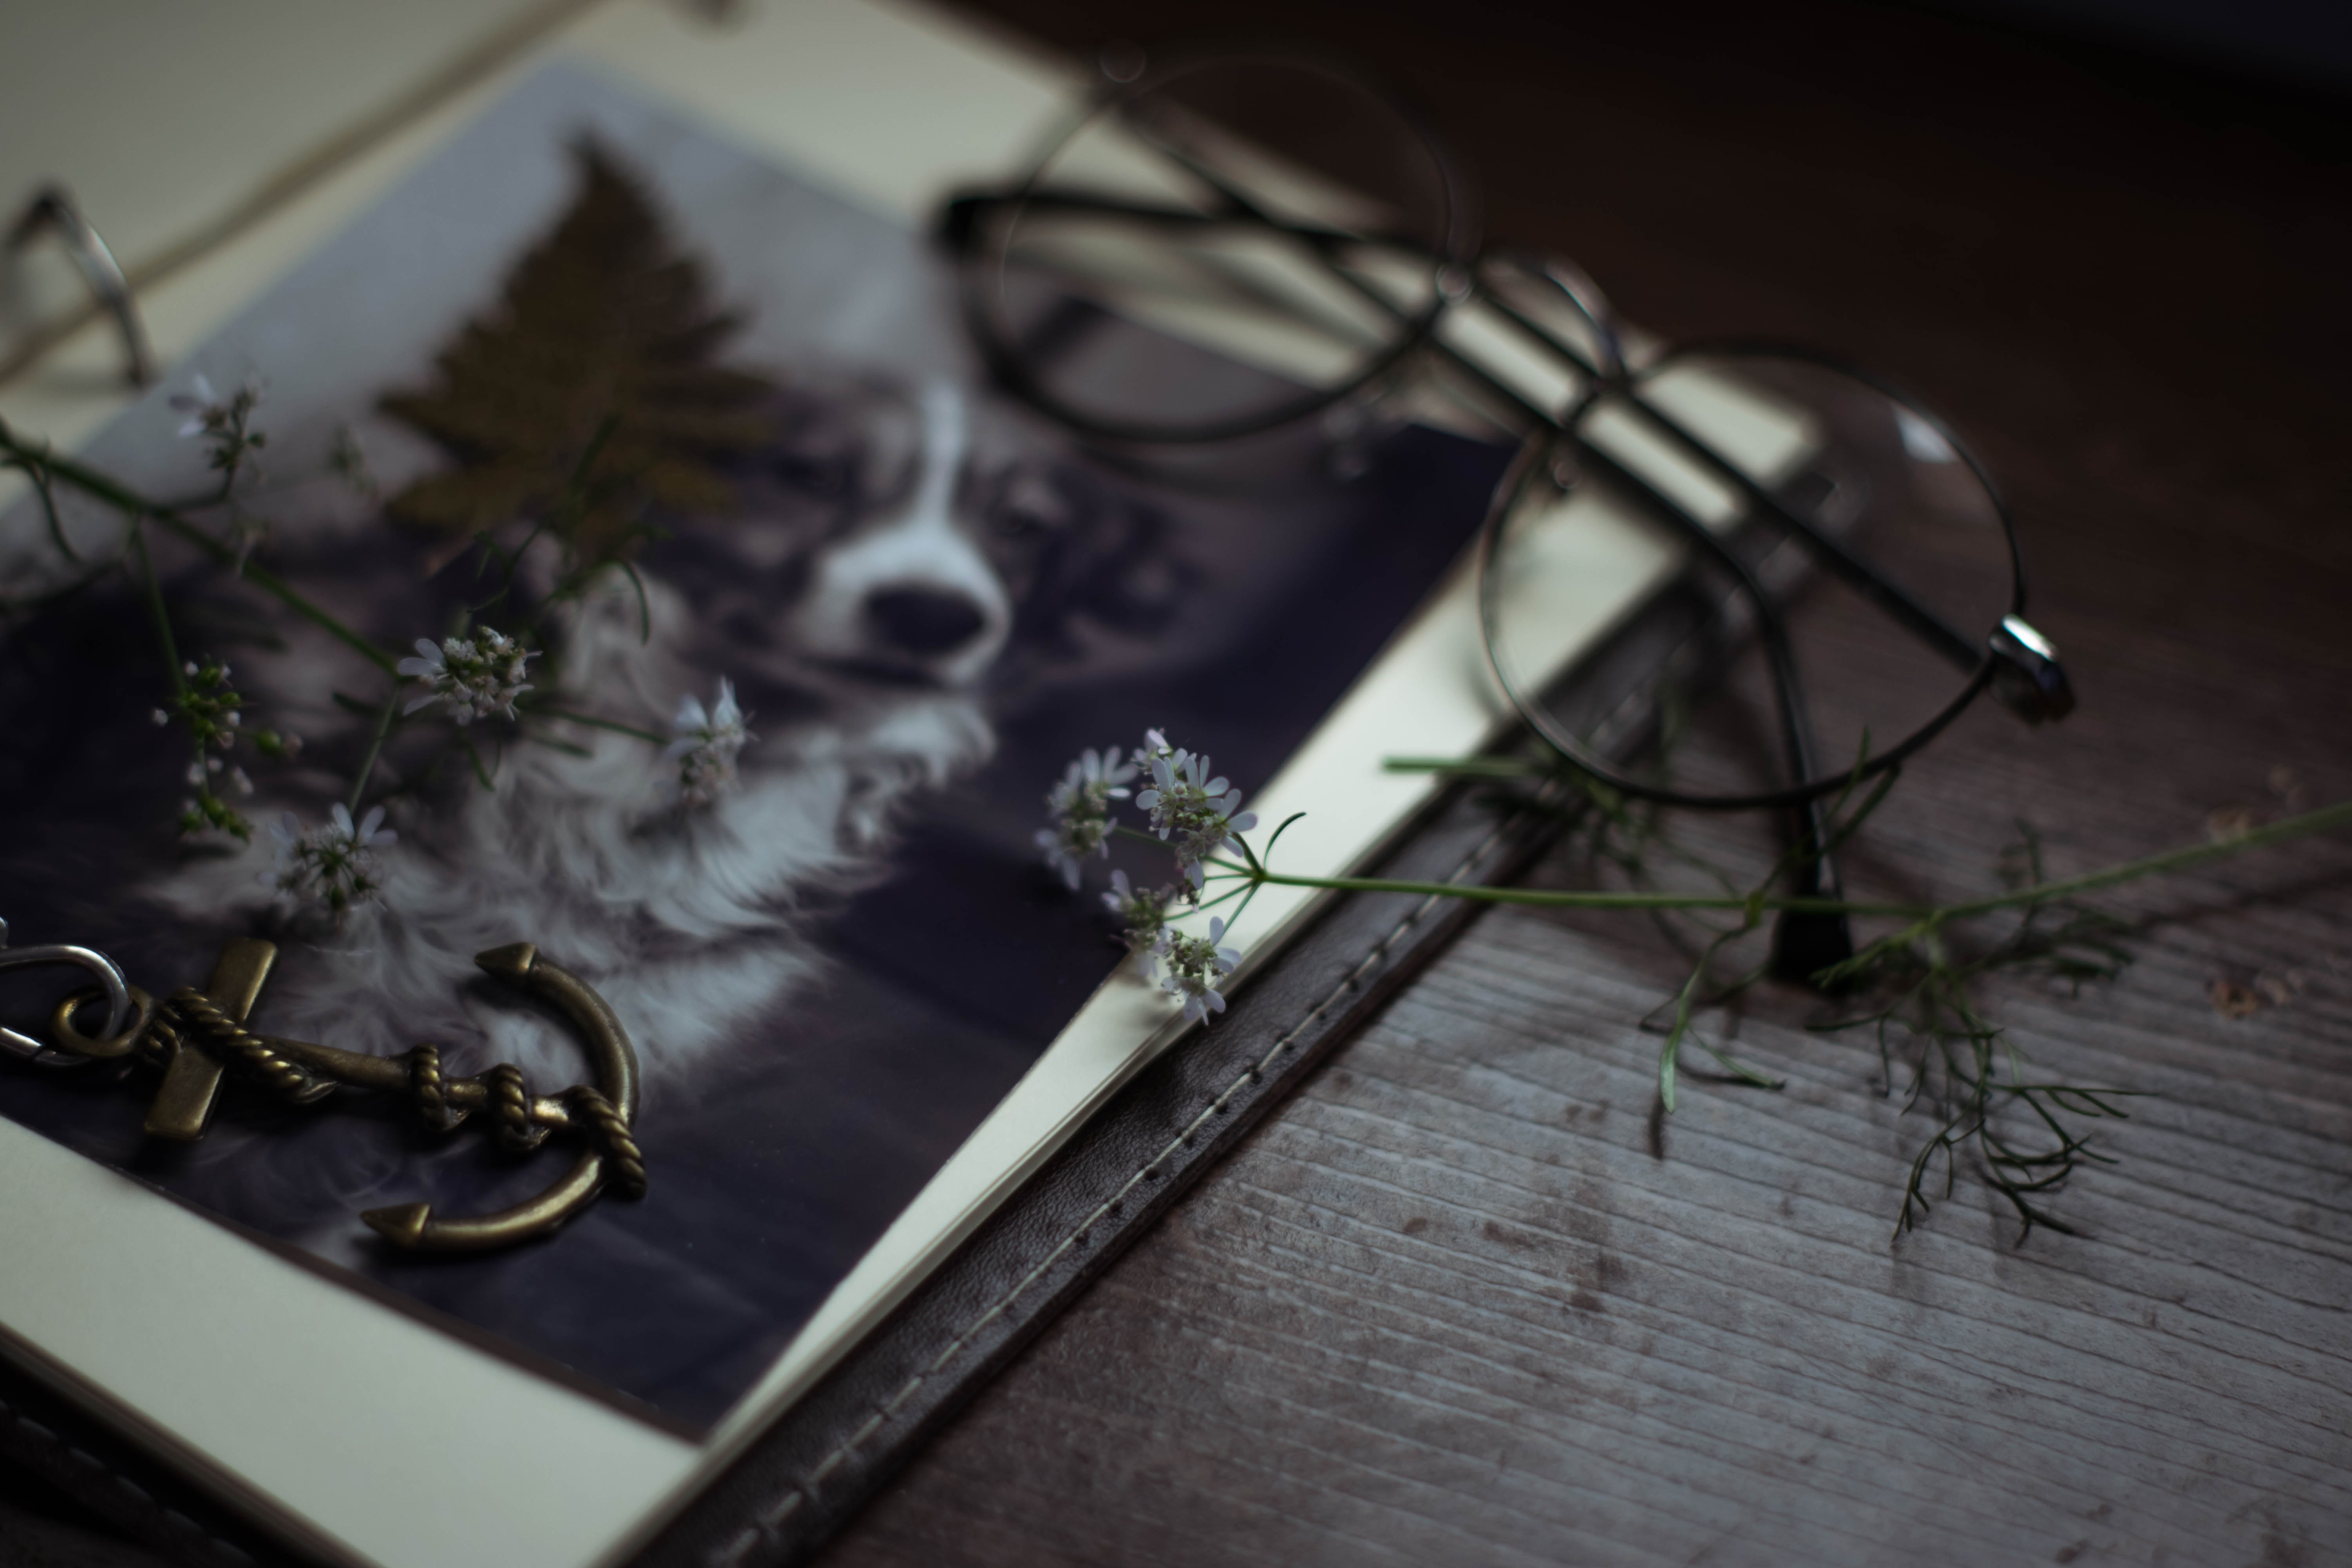 https://www.pexels.com/photo/opened-diary-with-dog-photo-eyeglasses-and-white-flowers-4896292/